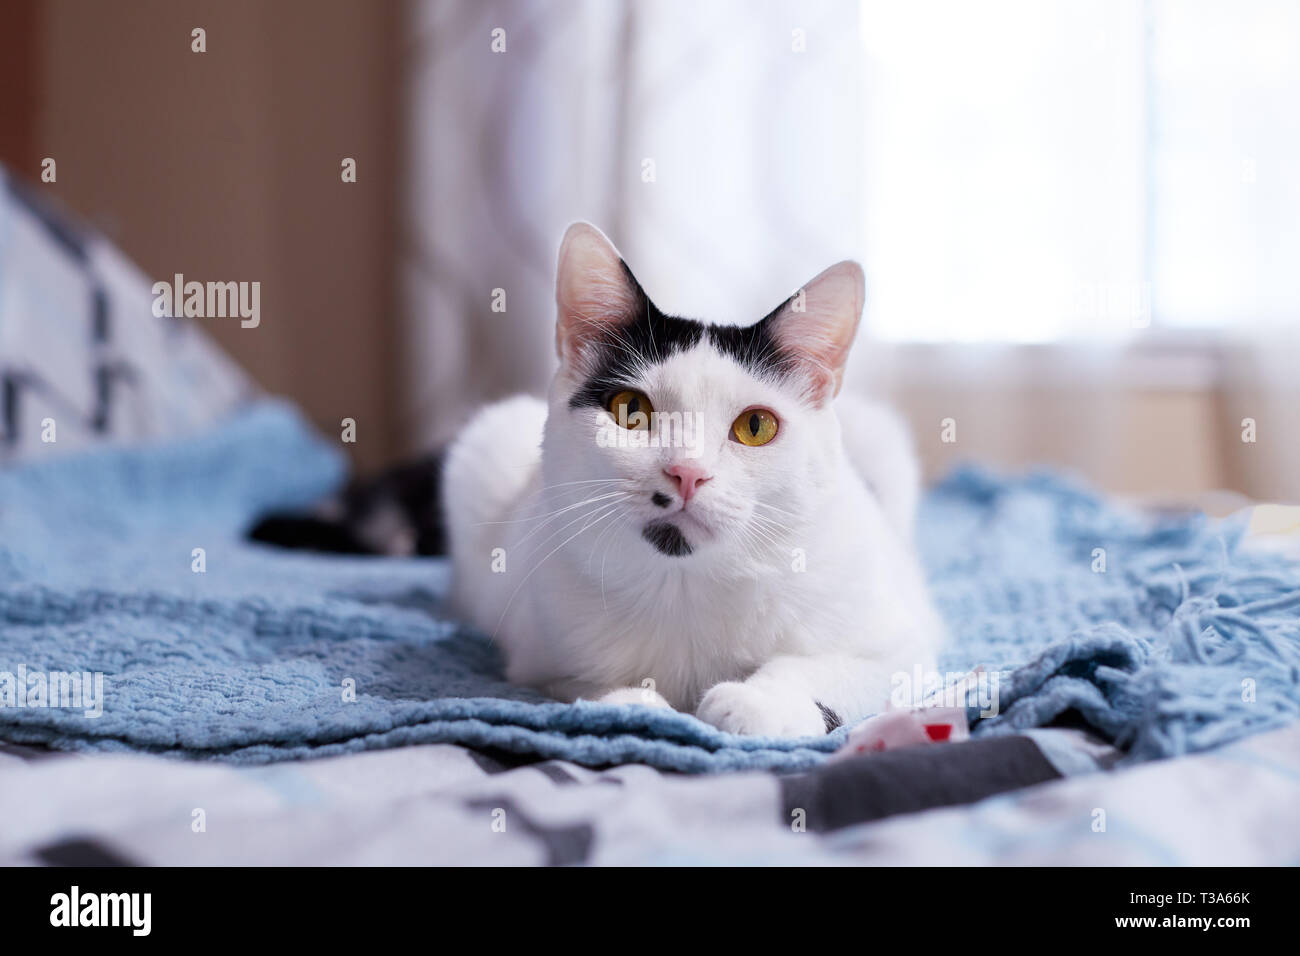 A friendly white cat with black markings and yellow eyes is relaxing on a blue blanket Stock Photo